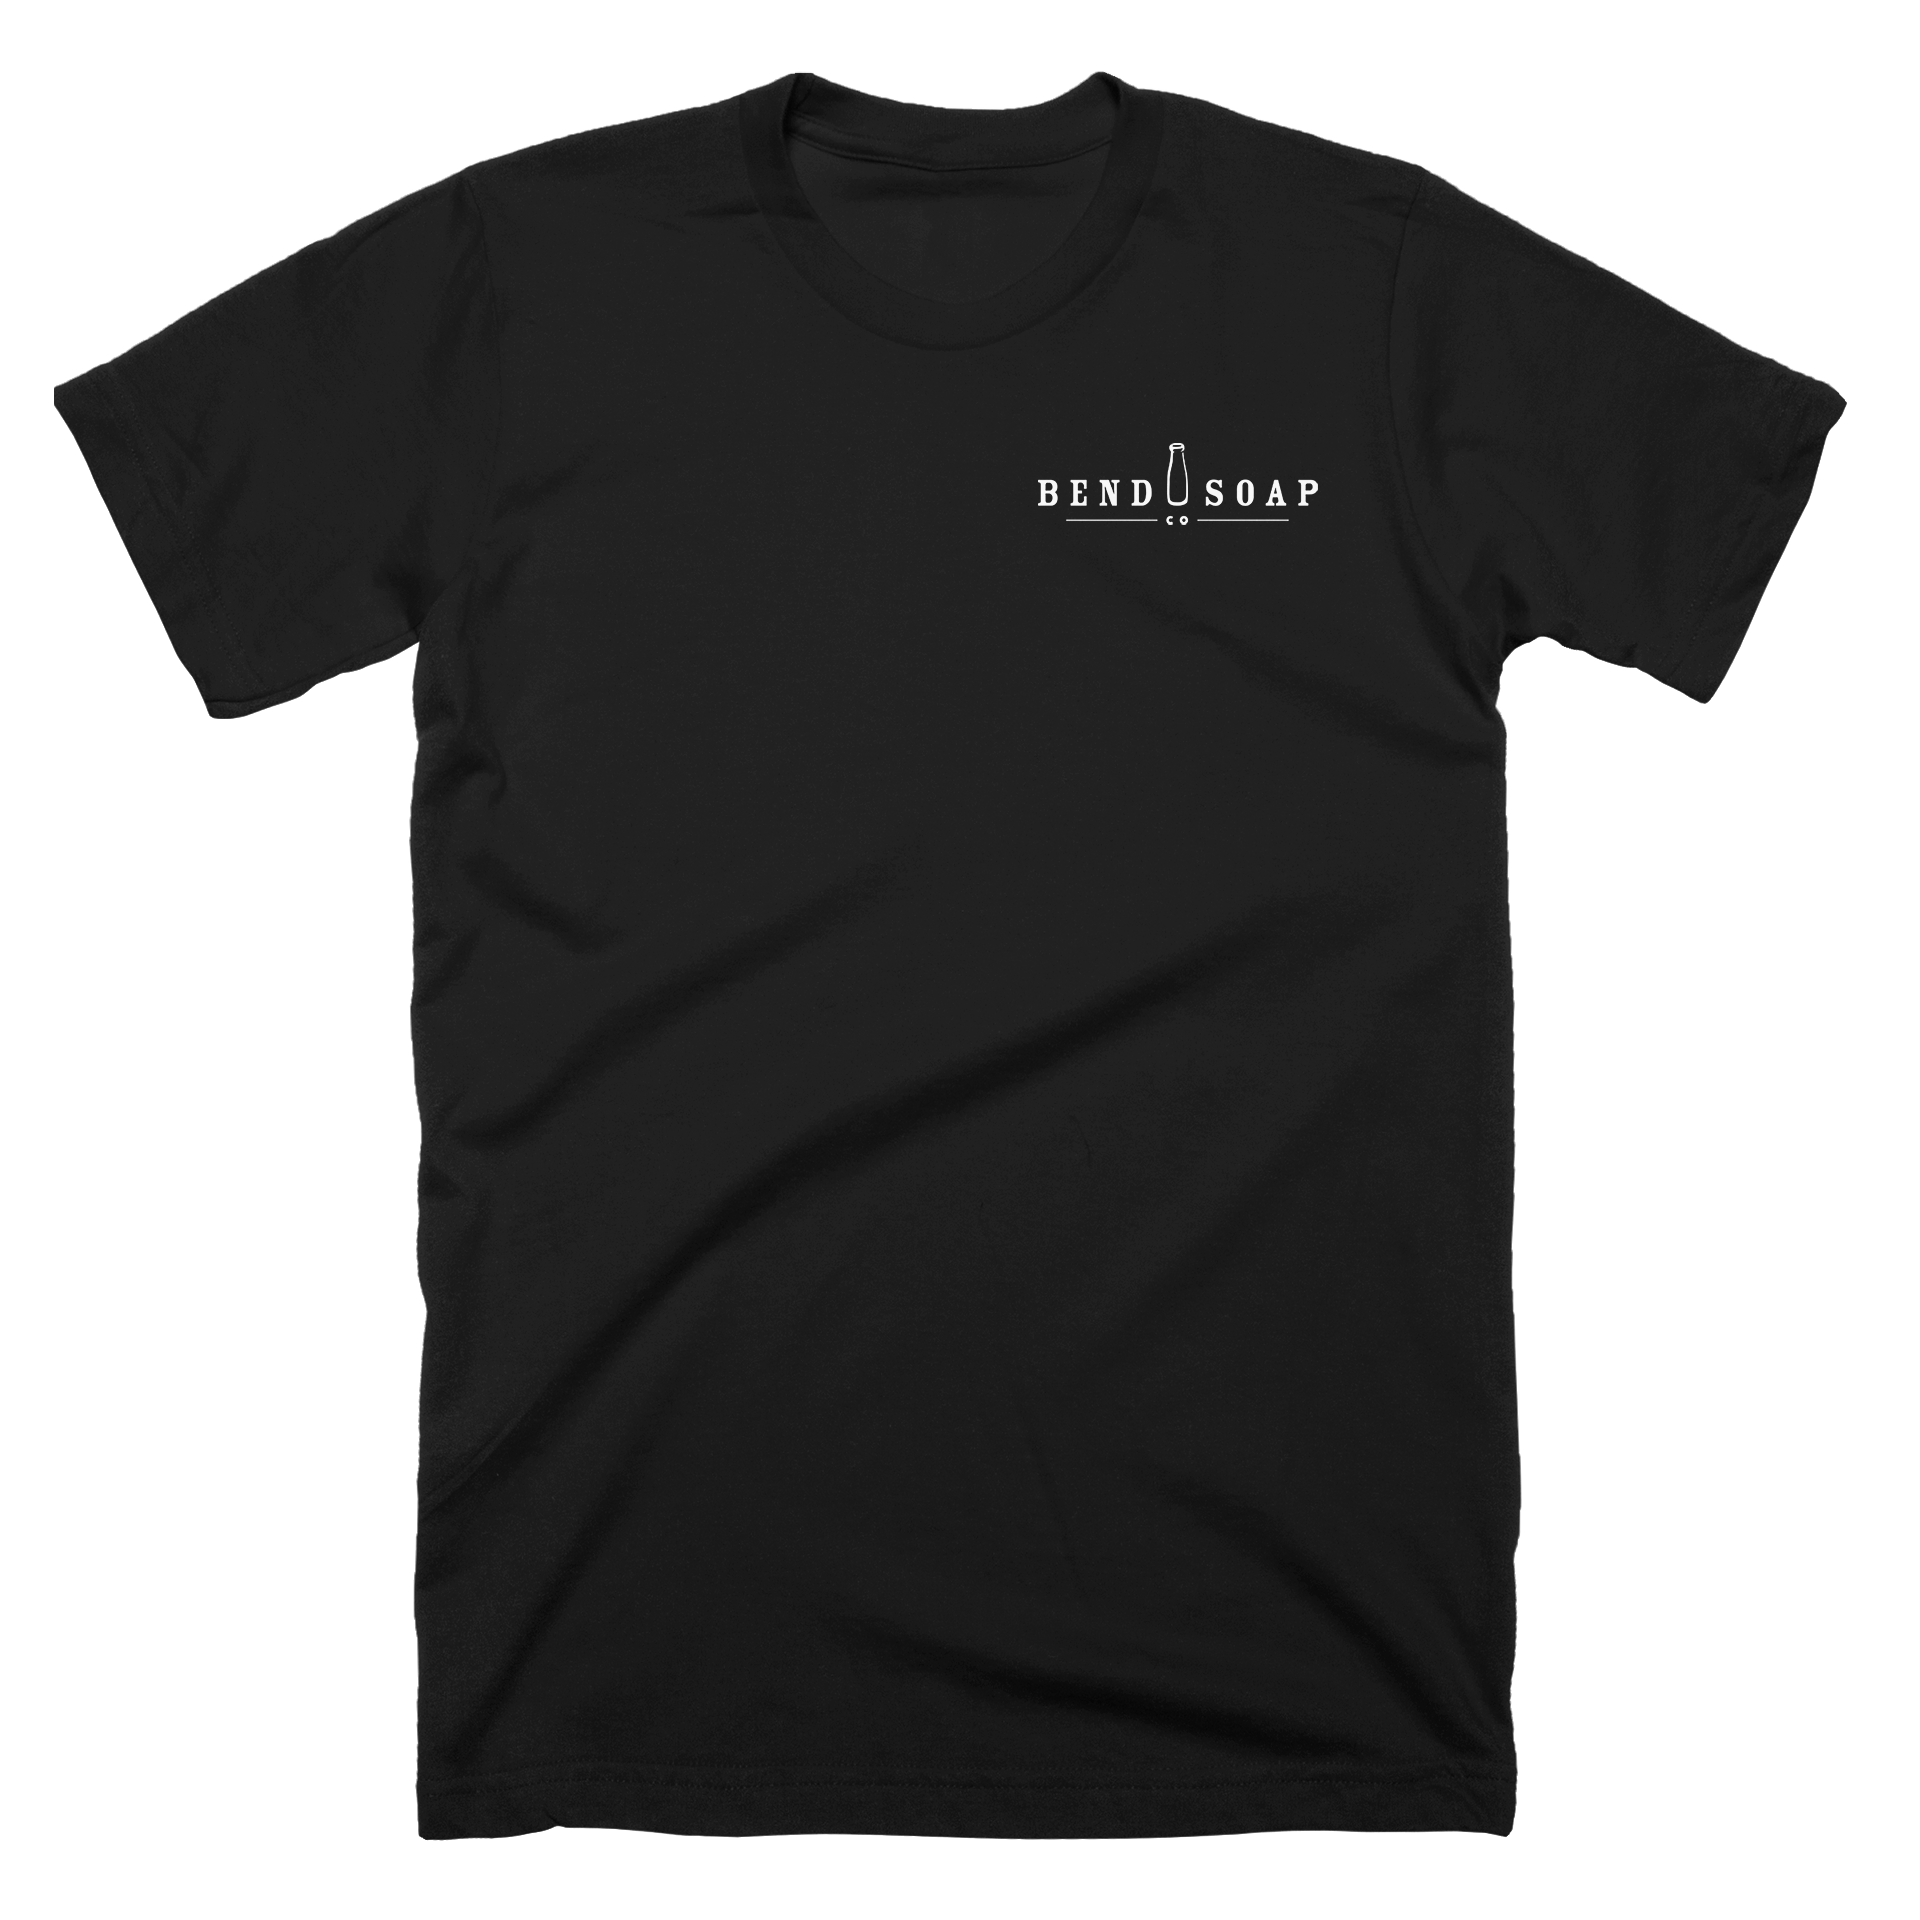 Front view of the Black Male Bend Soap Tee-shirt